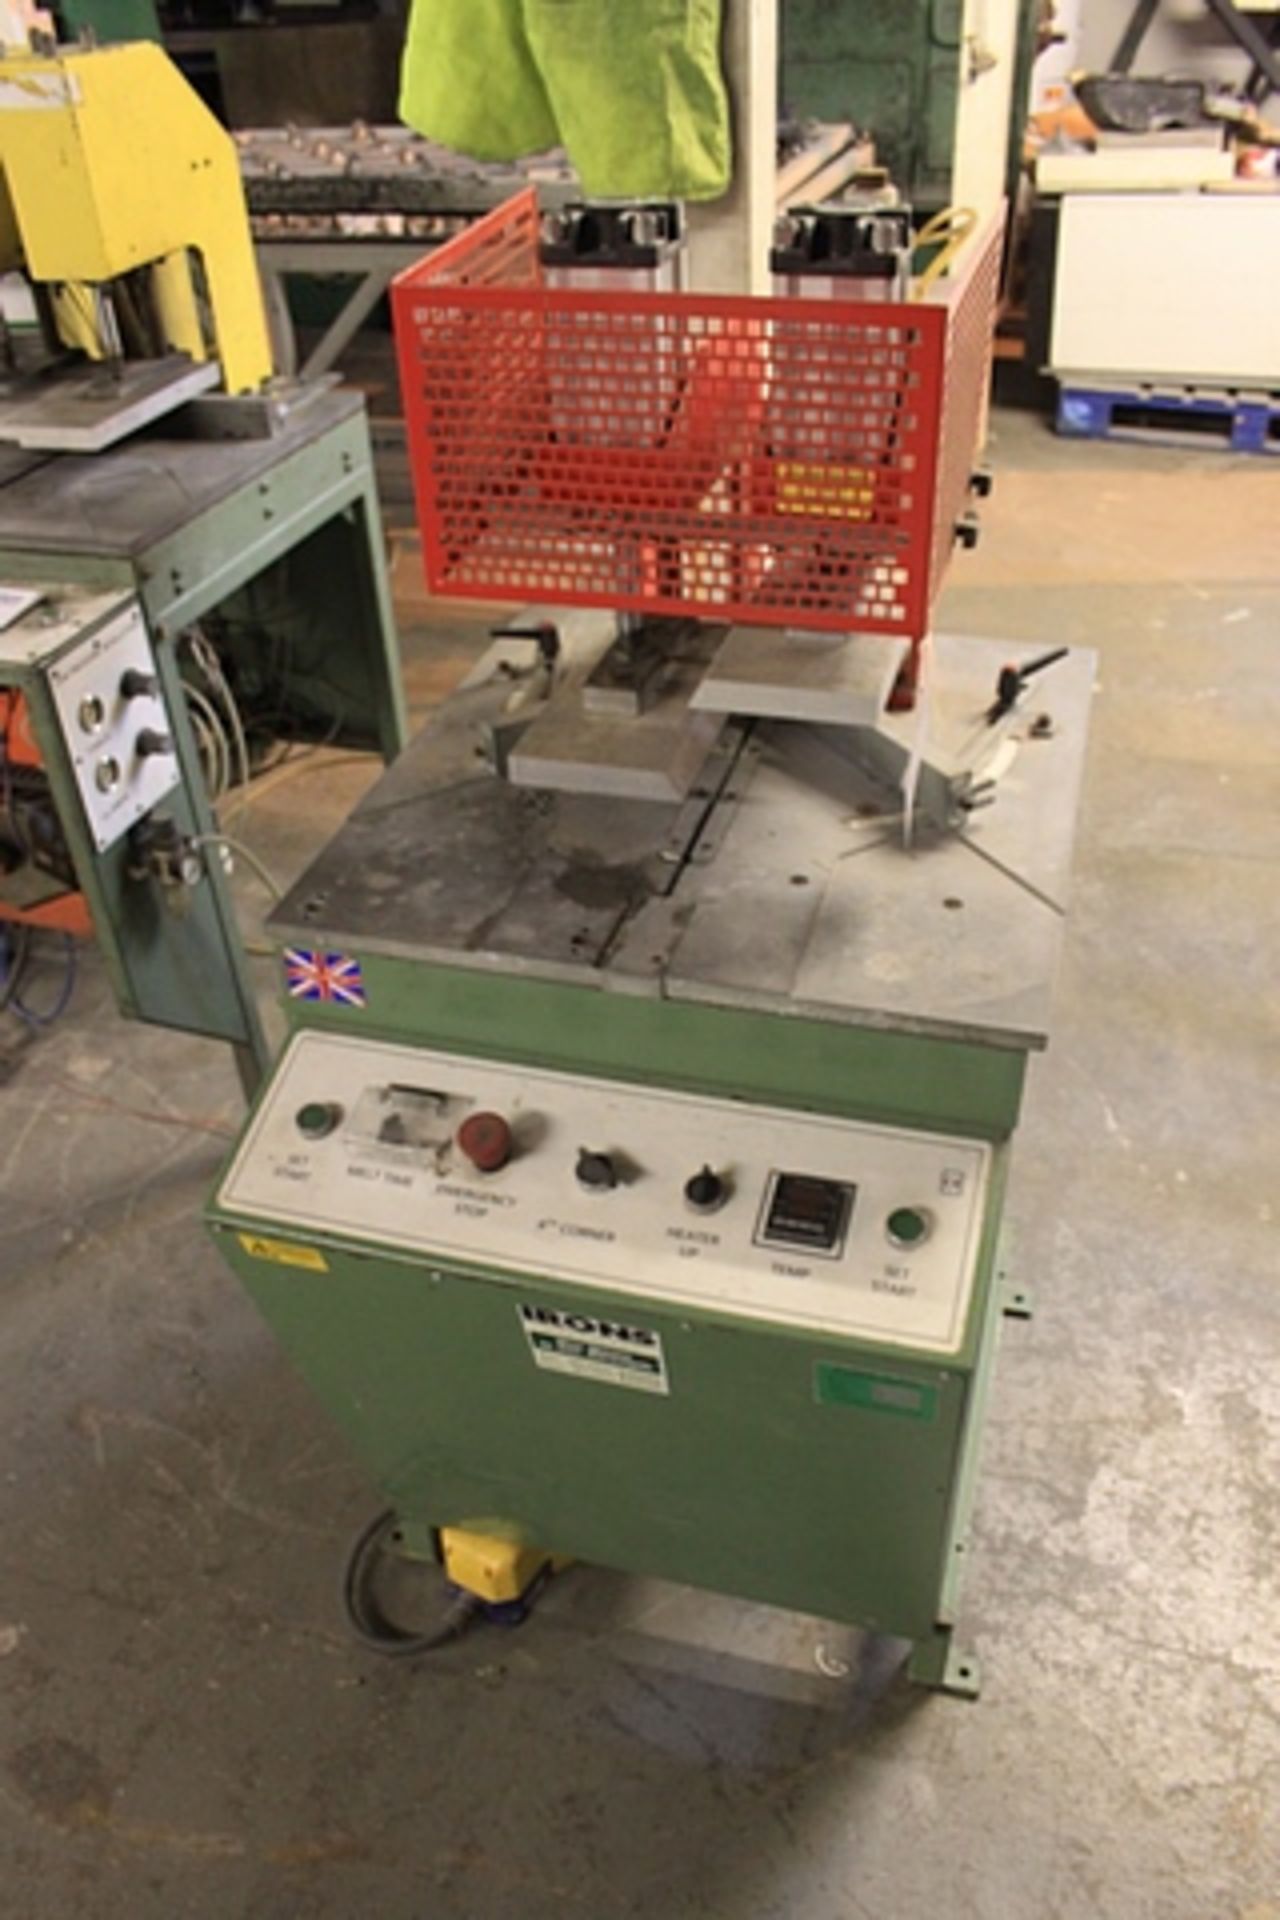 Barrie Irons SA0280 copy router YOM 2000 single phase (s/n 006449) - Image 2 of 2